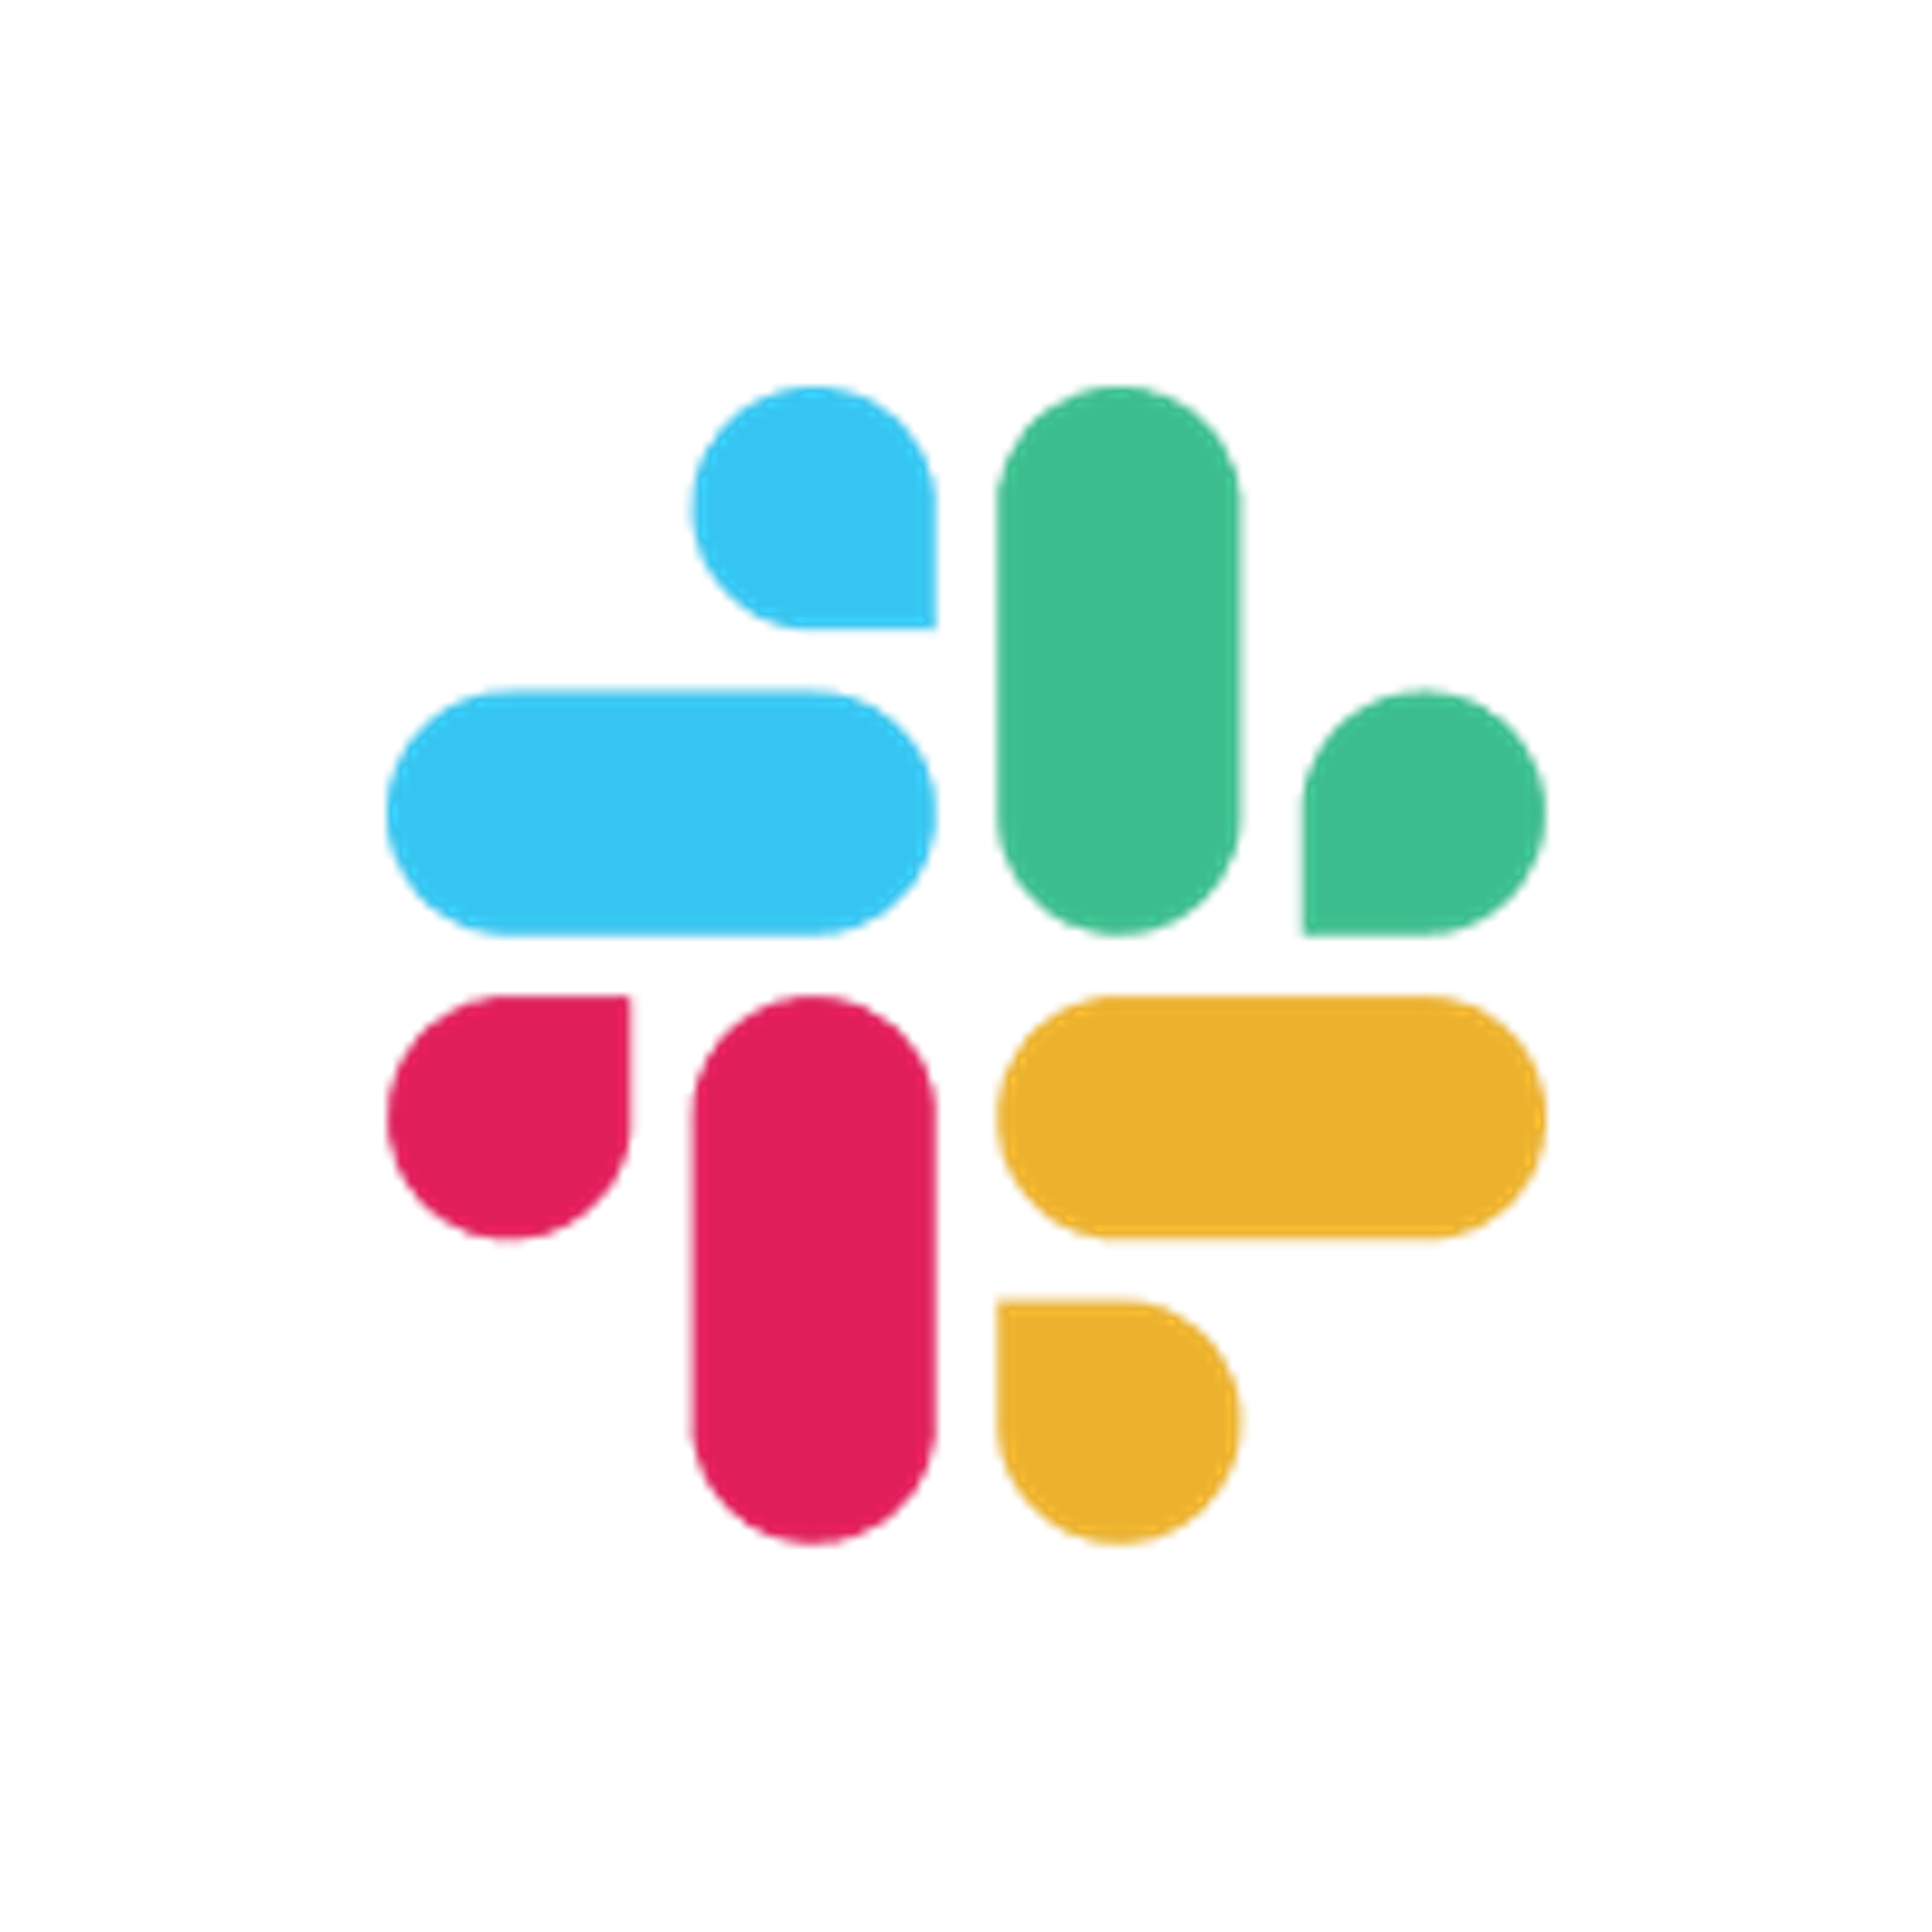 Slack
Send your Tally form submissions to Slack.